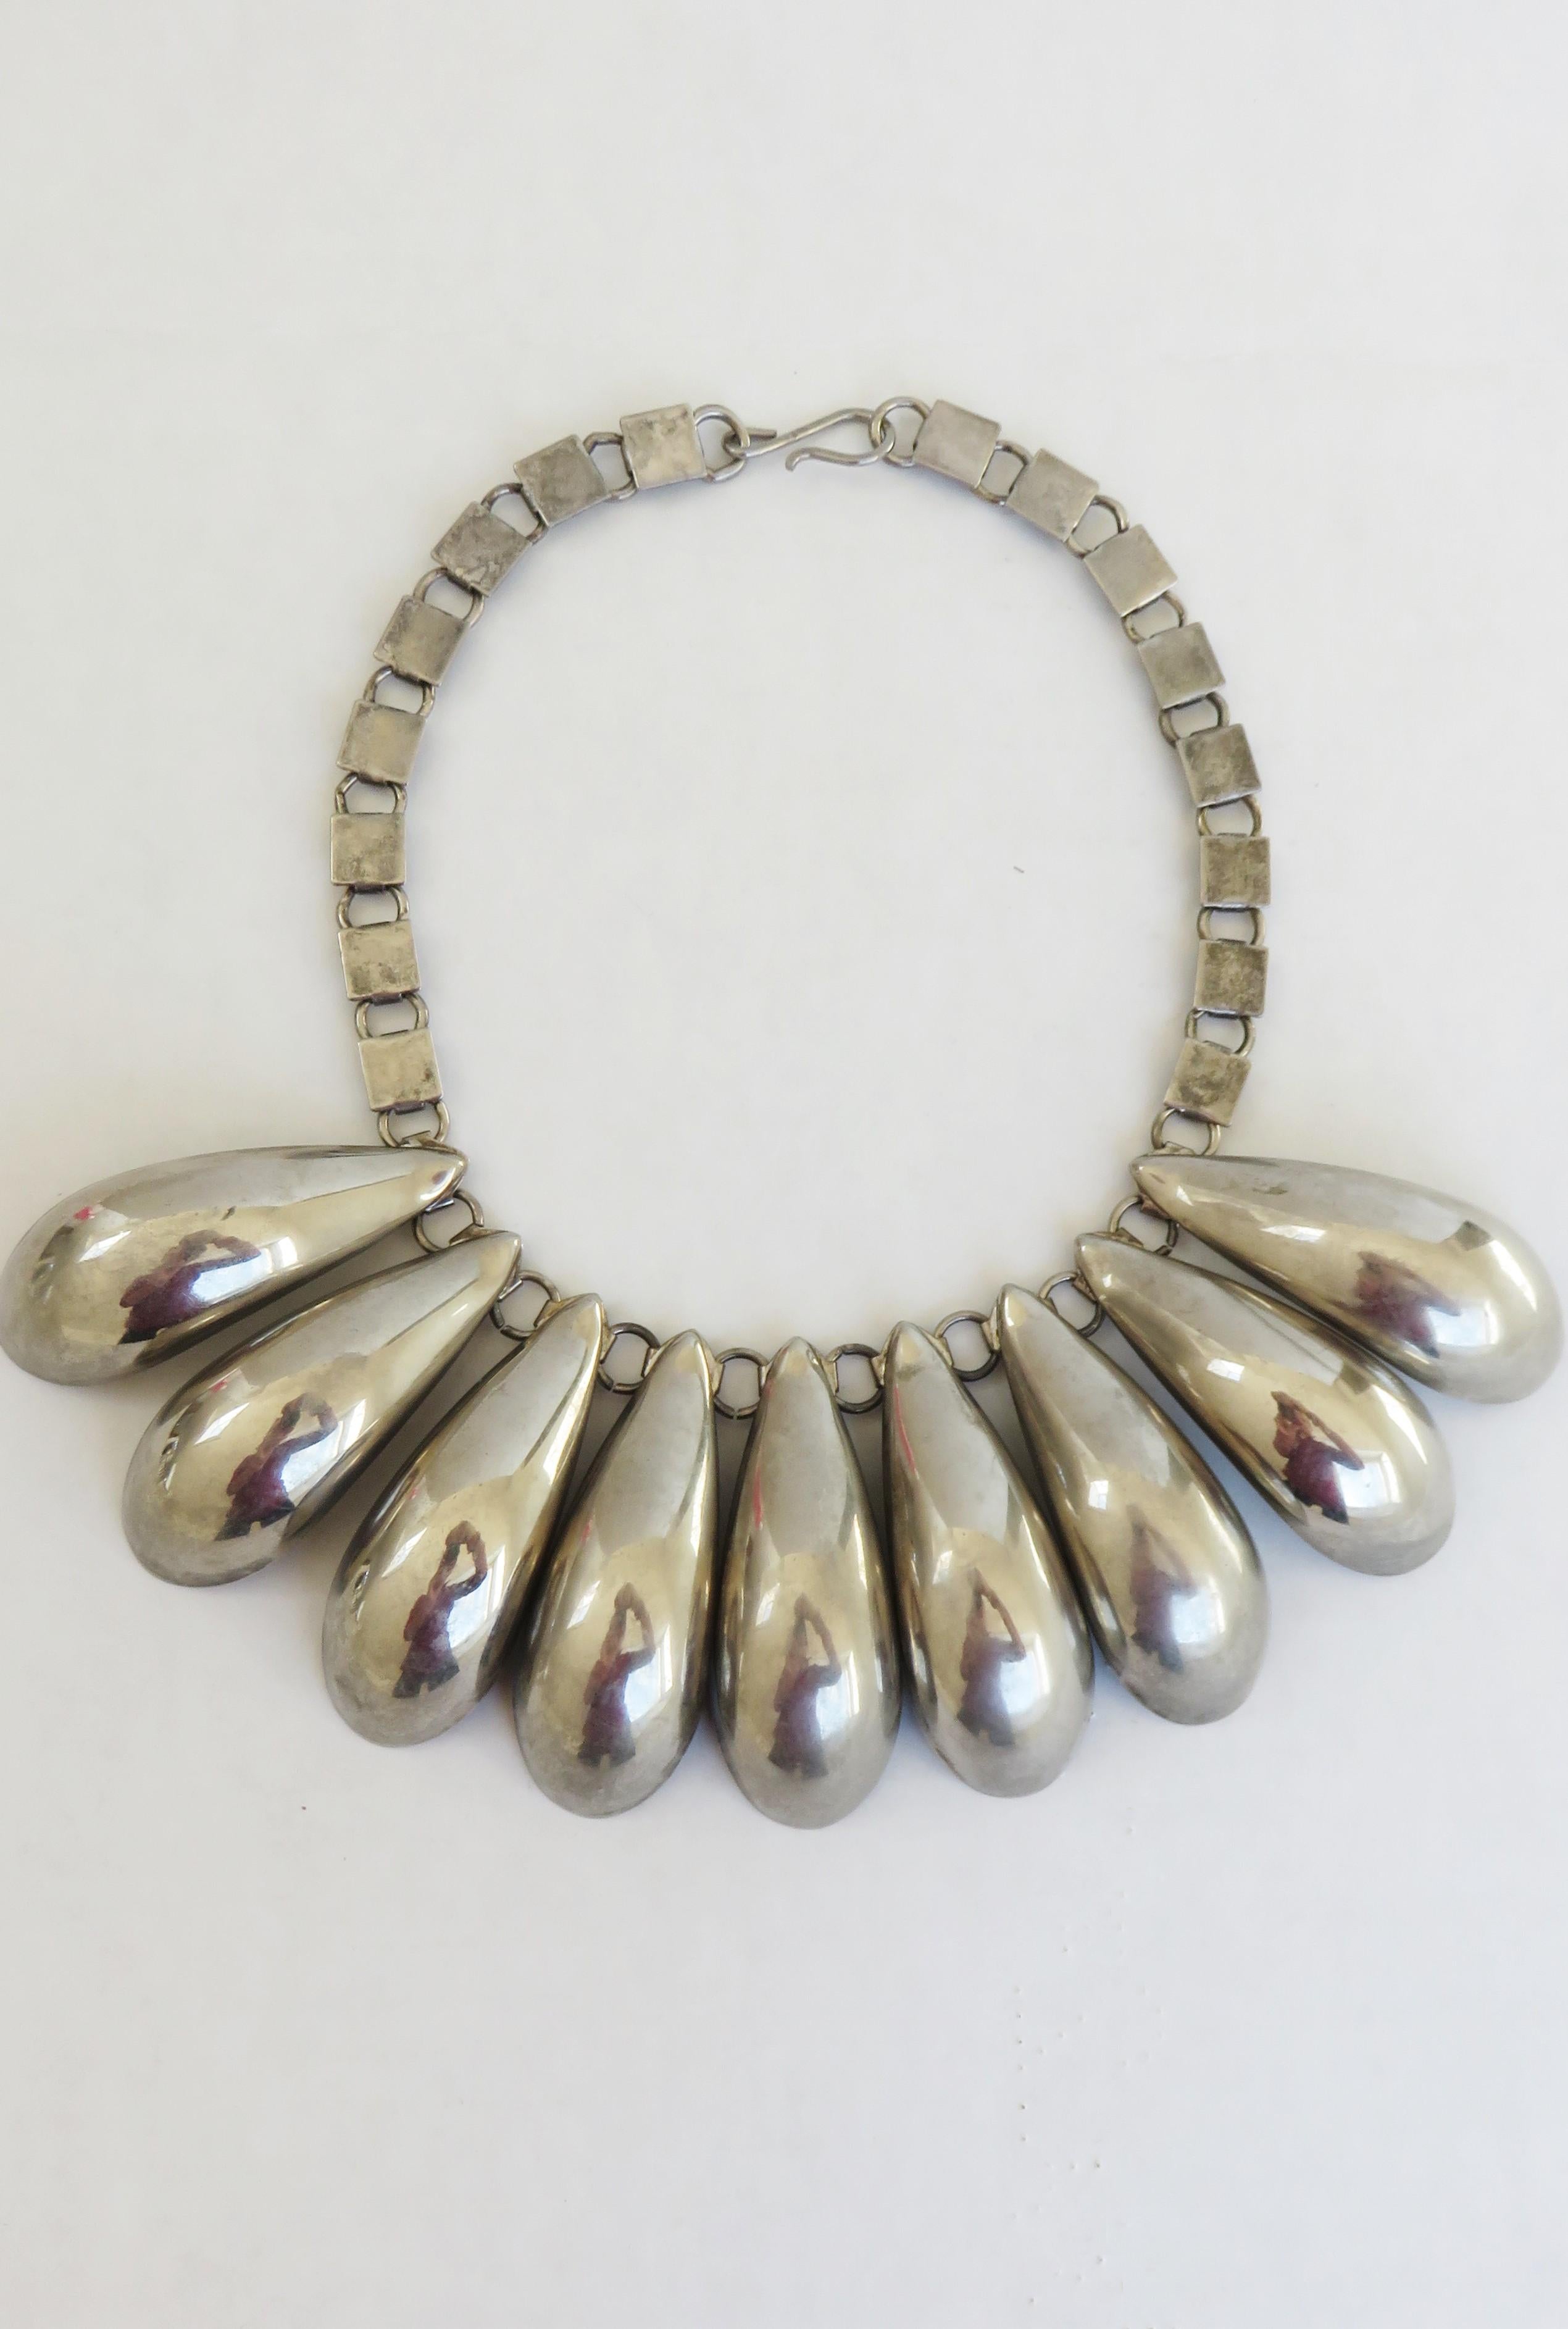 A stunning silver steel drop necklace. It has a box chain and 9 2